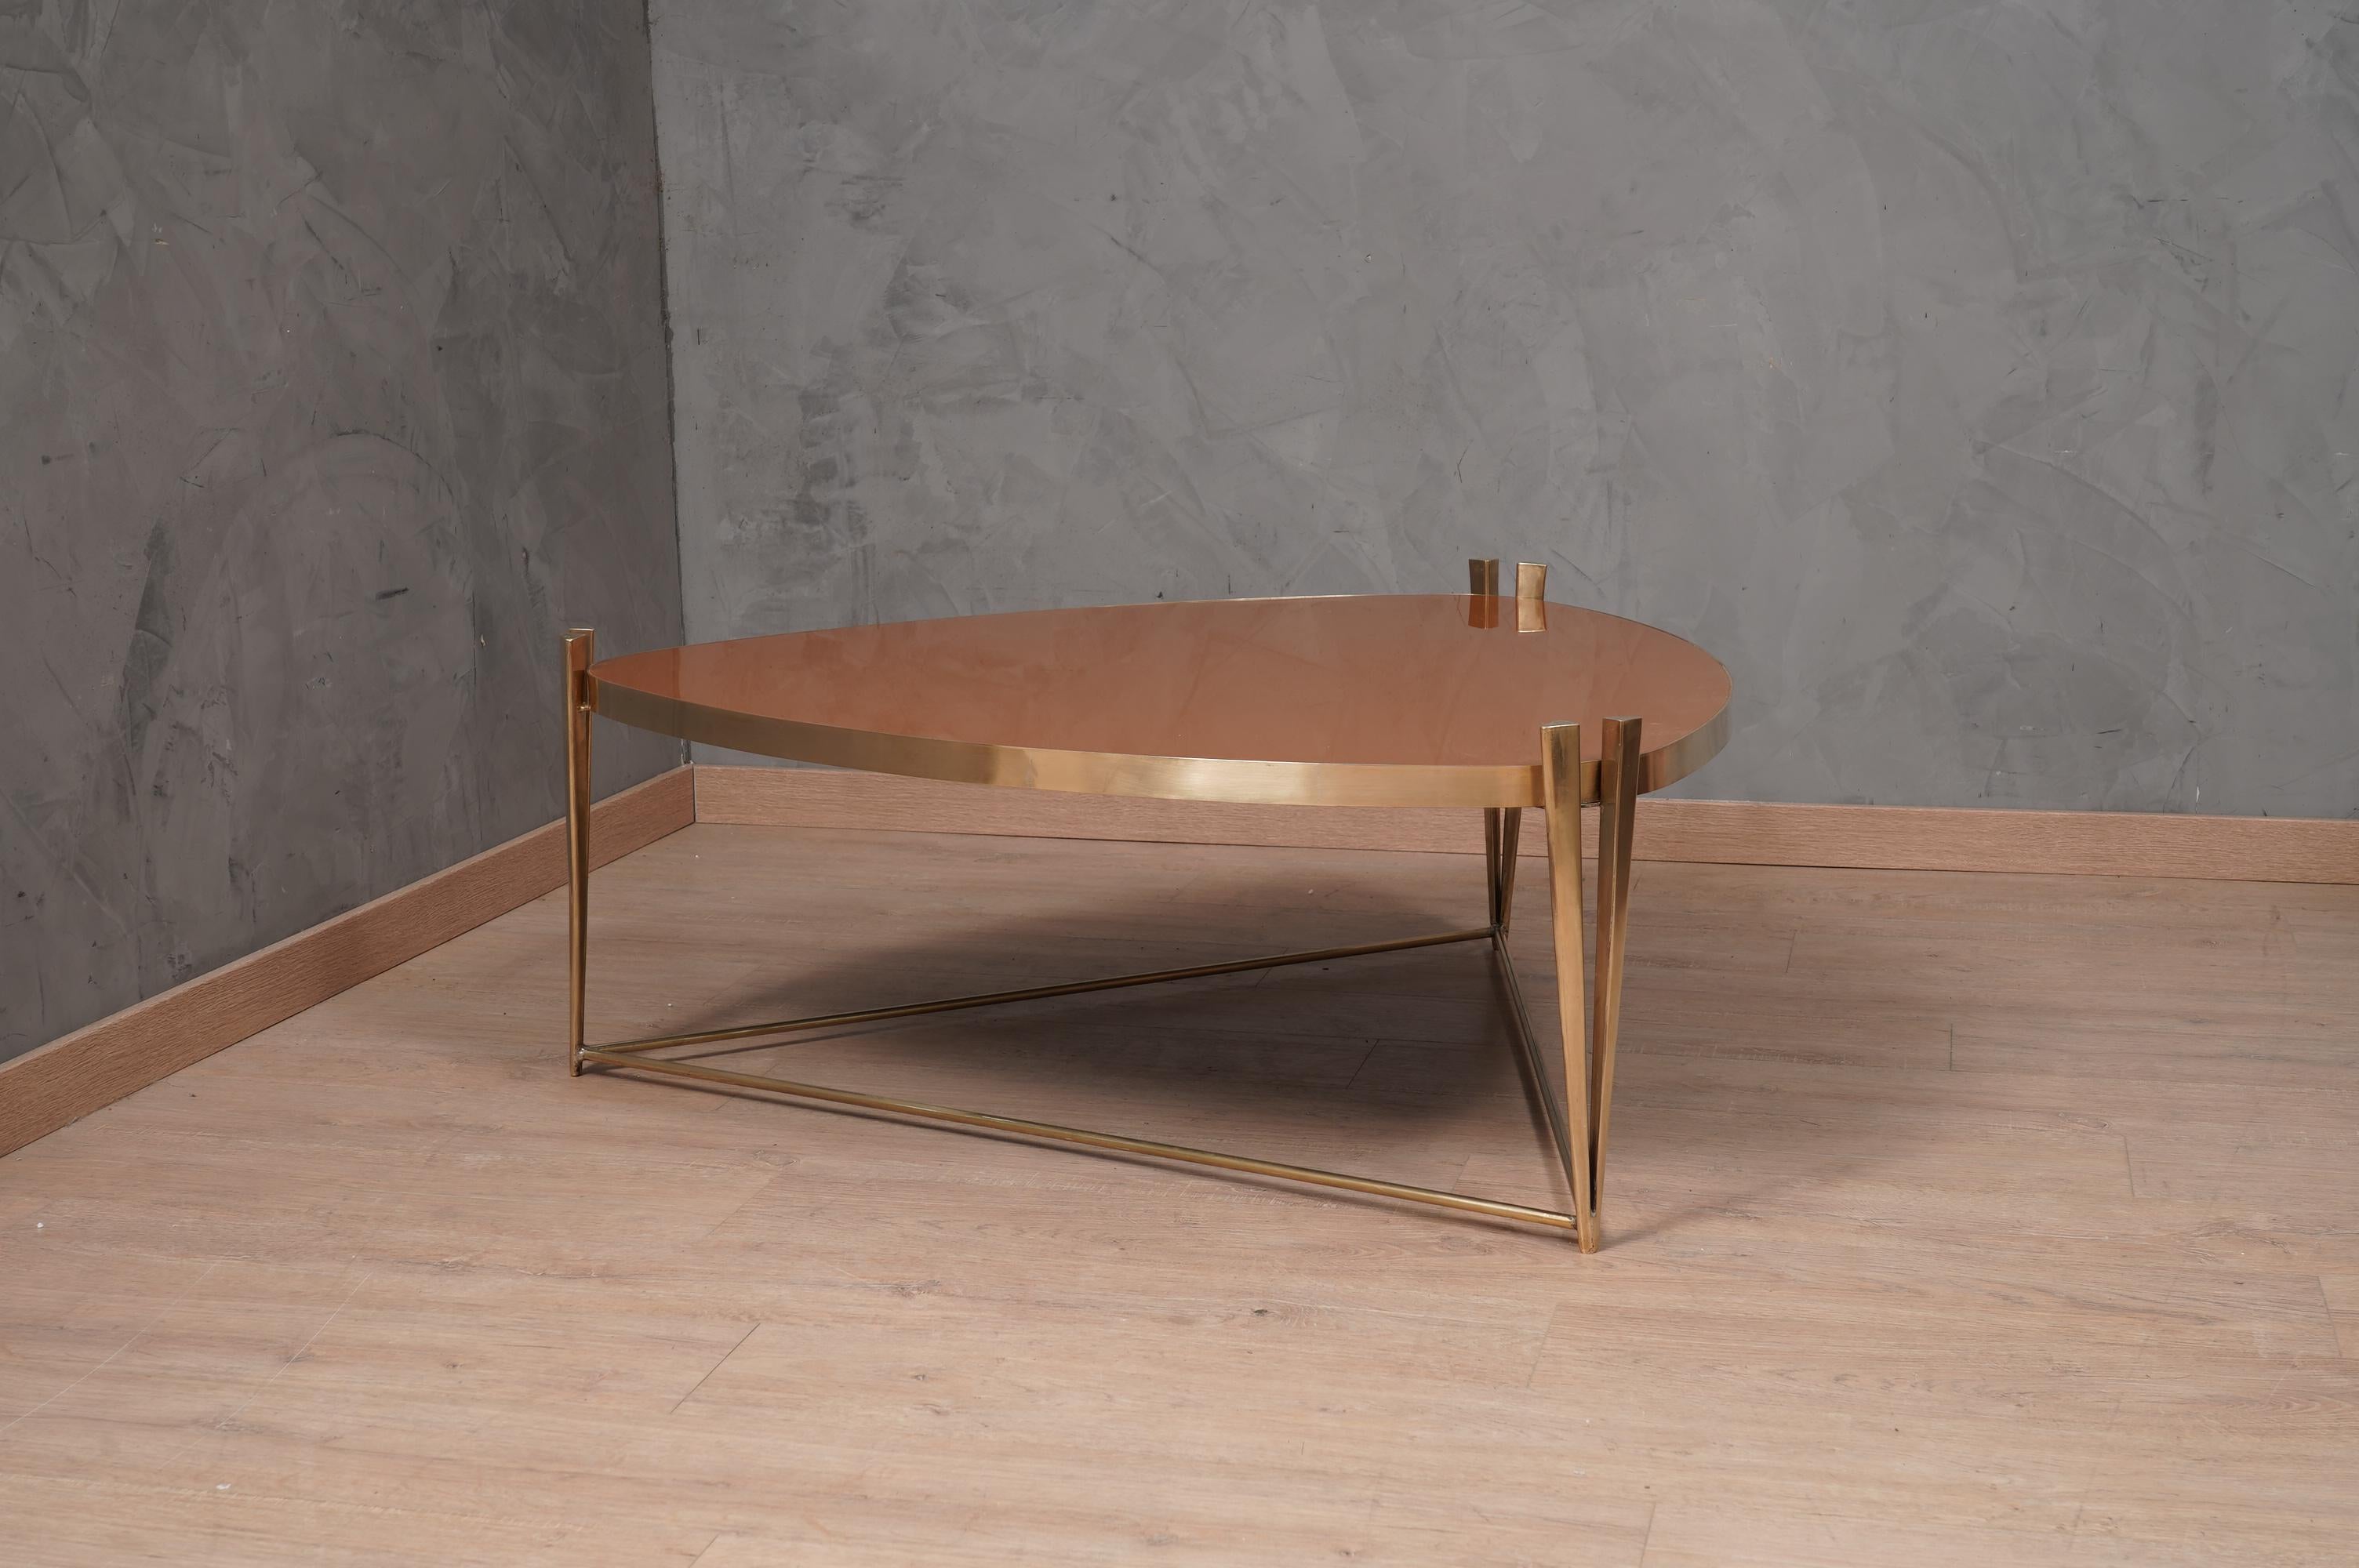 Pure mid-century Italian style, beautiful coffee table elegant linear but with a very engaging design.

The sofa table has a triangular shape and a completely brass structure. The top is formed by a brass band positioned on the side of a wooden top